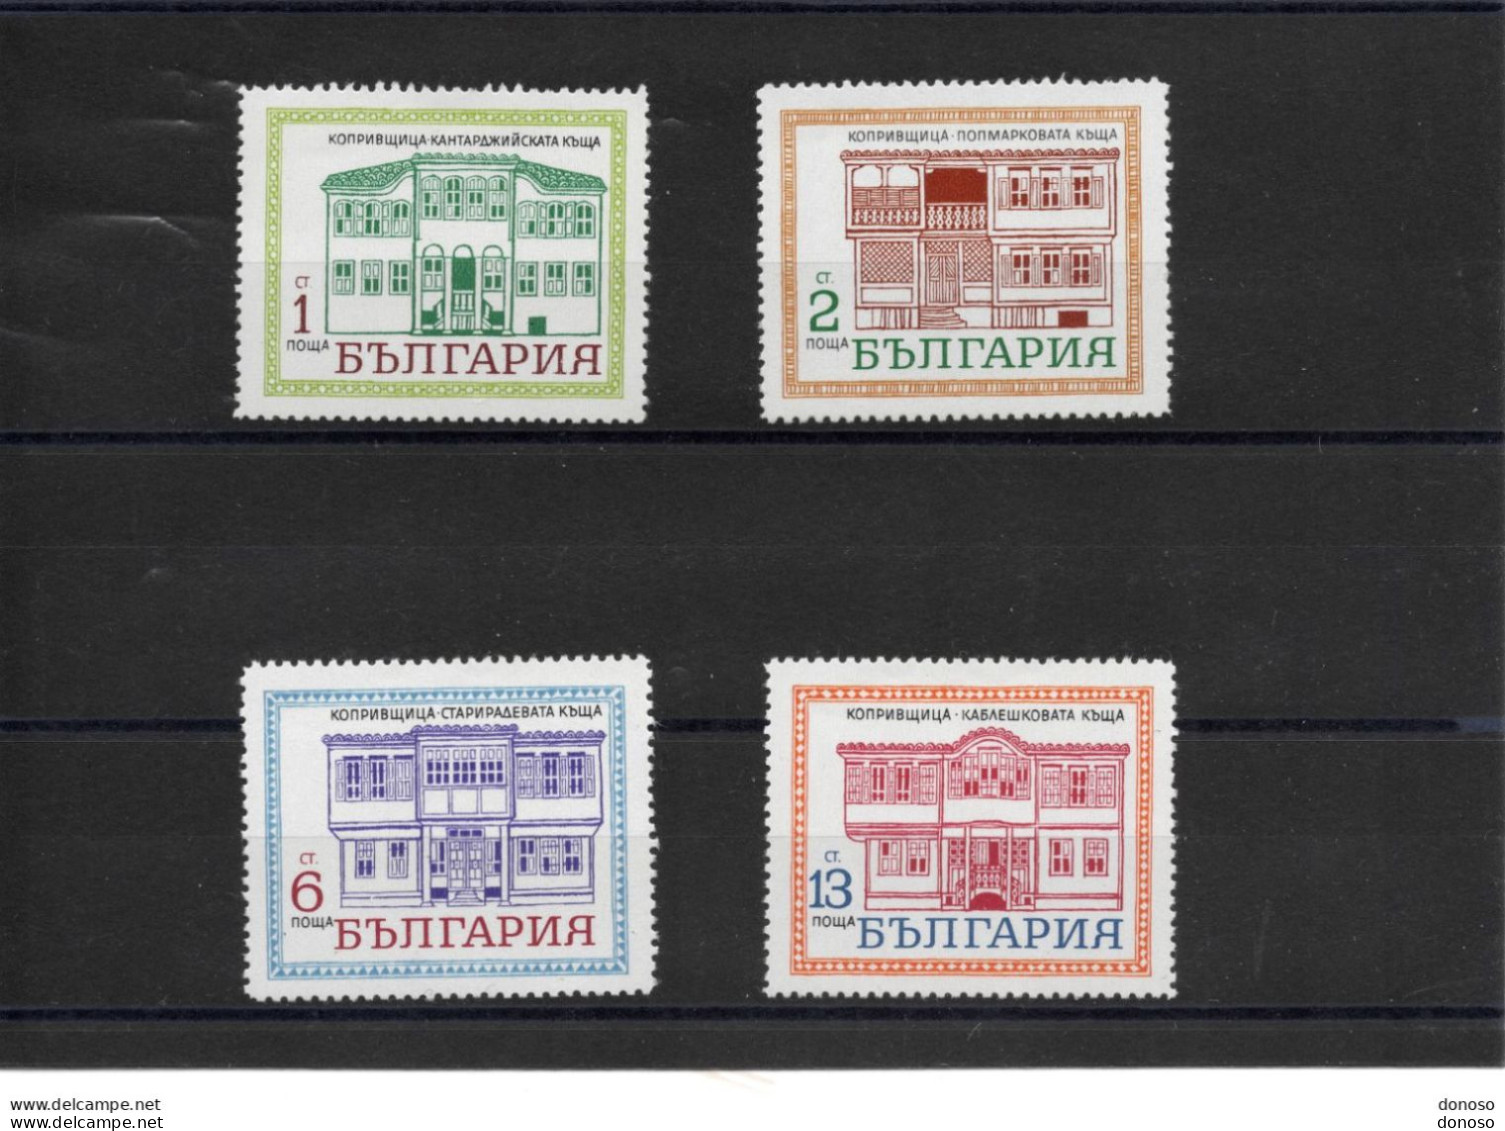 BULGARIE 1971 Maisons Anciennes Yvert 1866-1869, Michel 2096-2099  NEUF** MNH - Unused Stamps